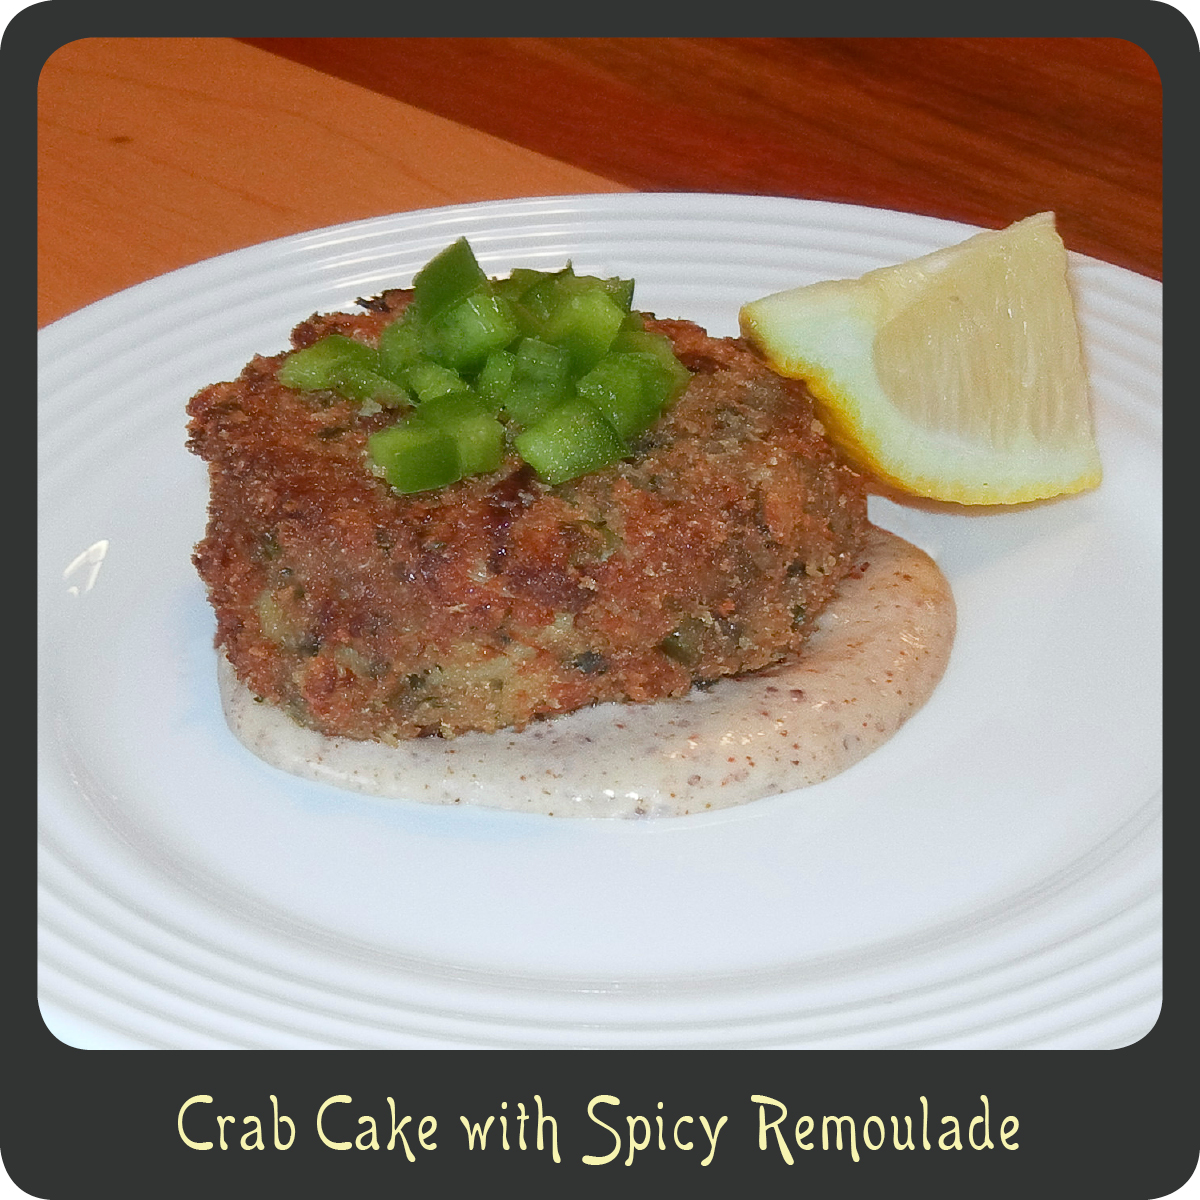 With Spicy Remoulade Sauce Crab Cakes